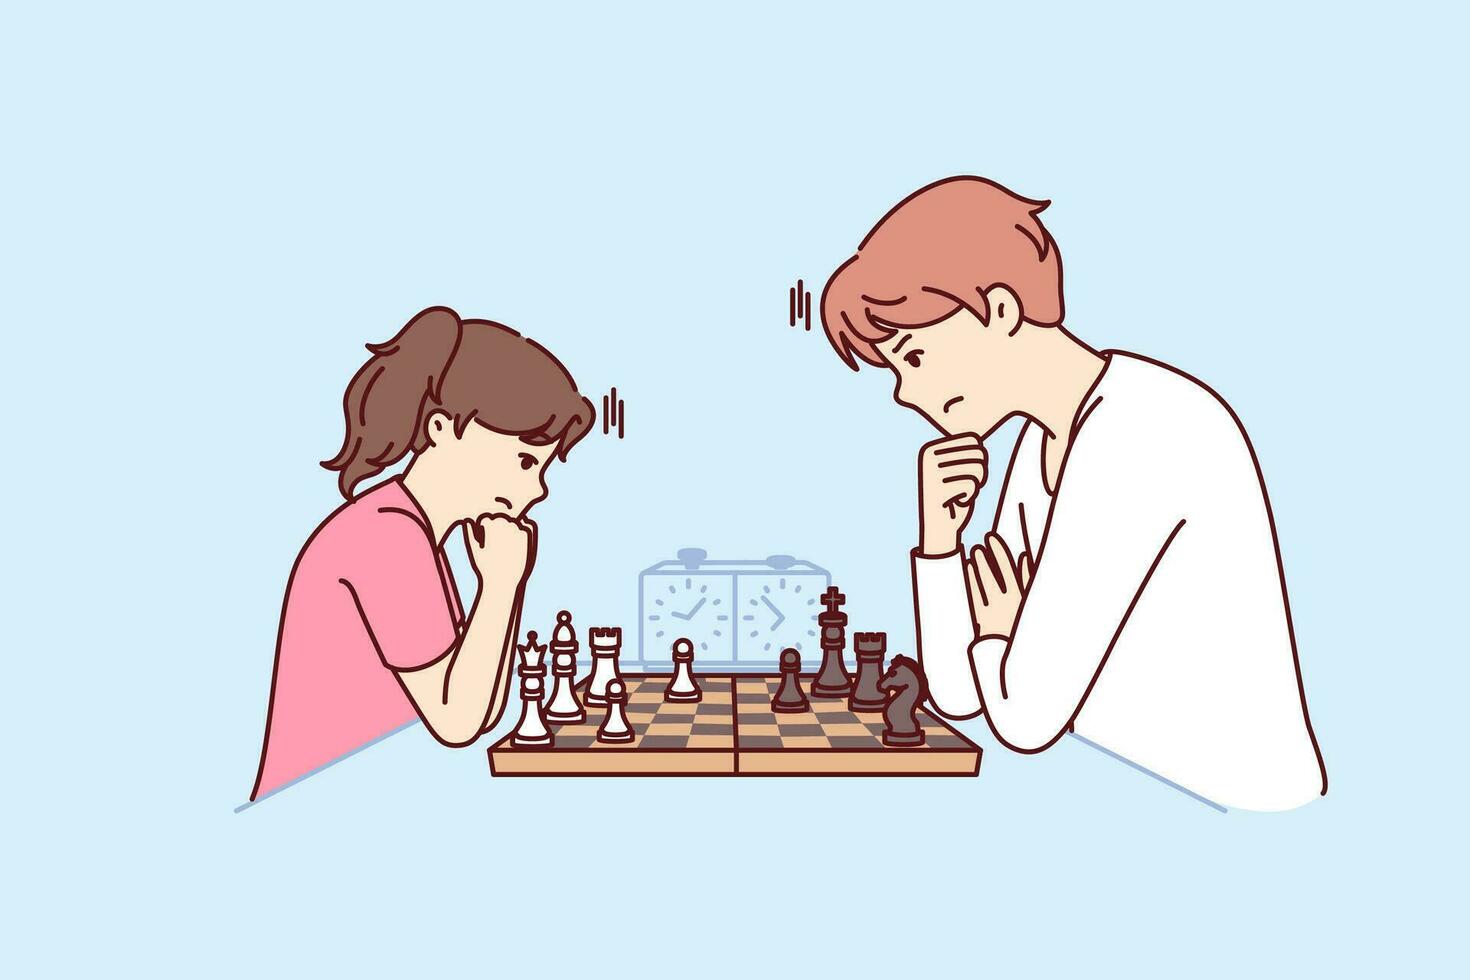 CLASS101+  Let's start educating gifted people with chess! The